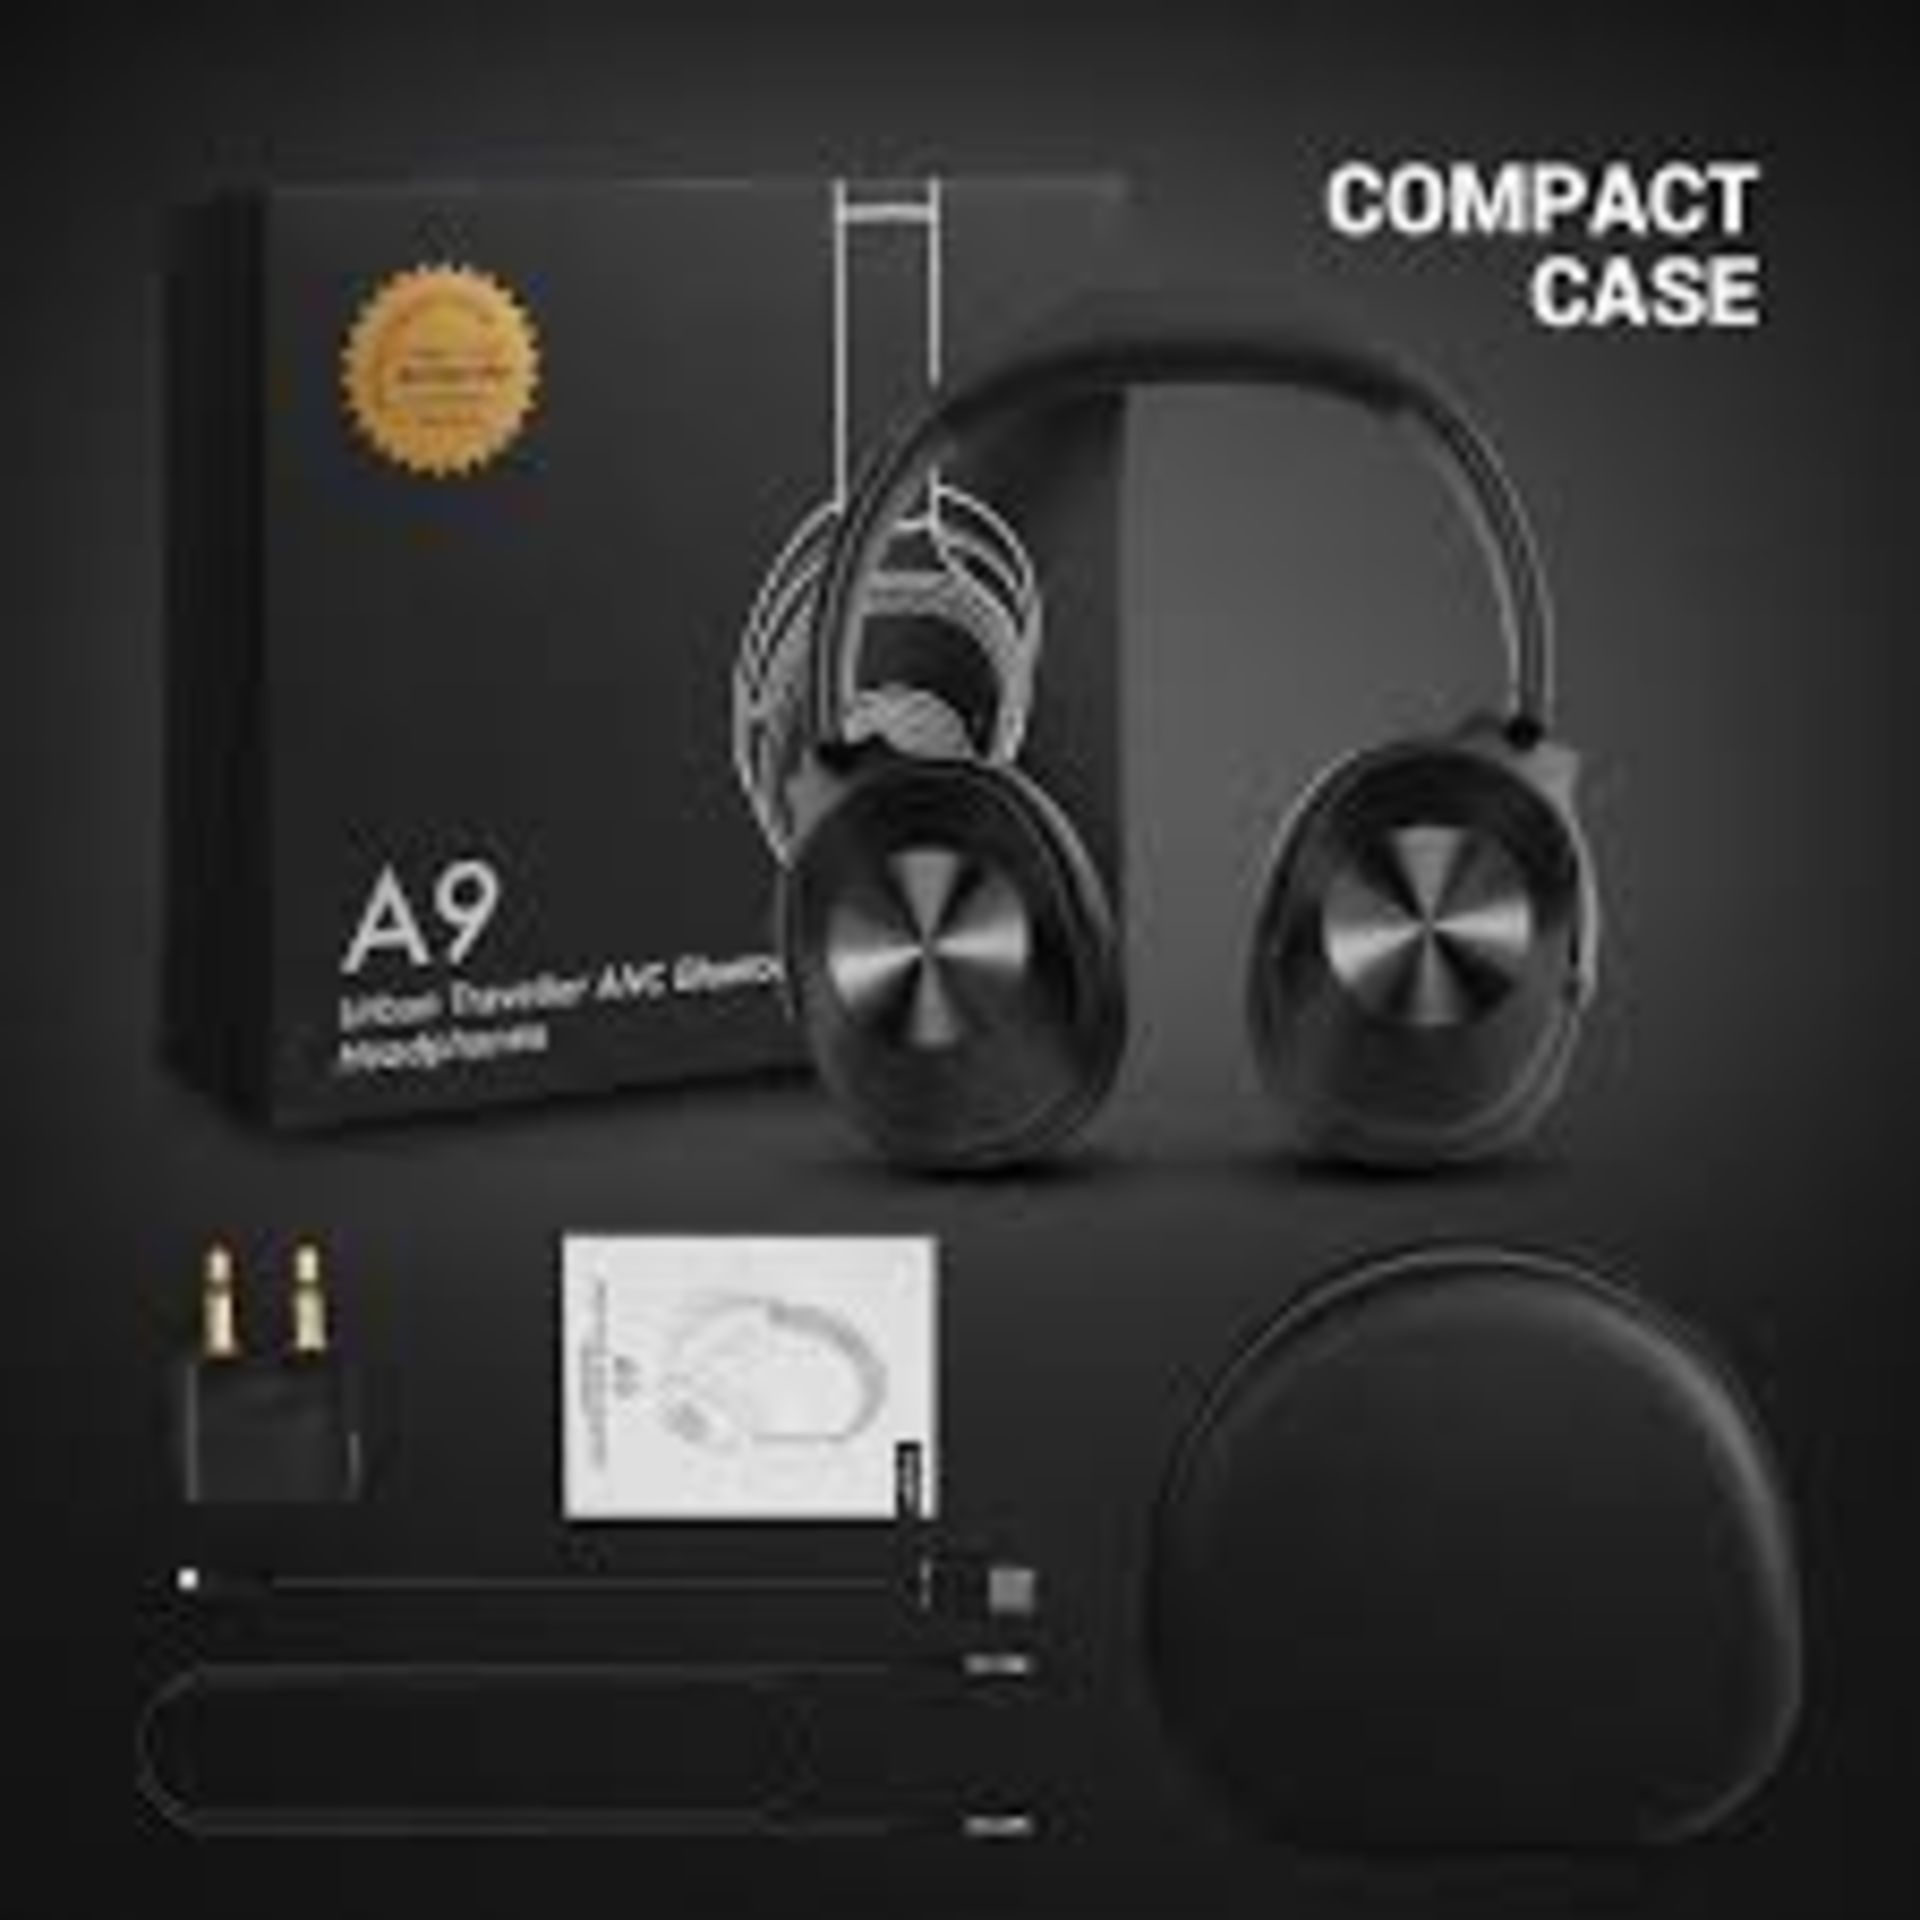 Boxed Brand New A9 The Urban Traveller Bluetooth Headphones By One Audio RRP £65 Each